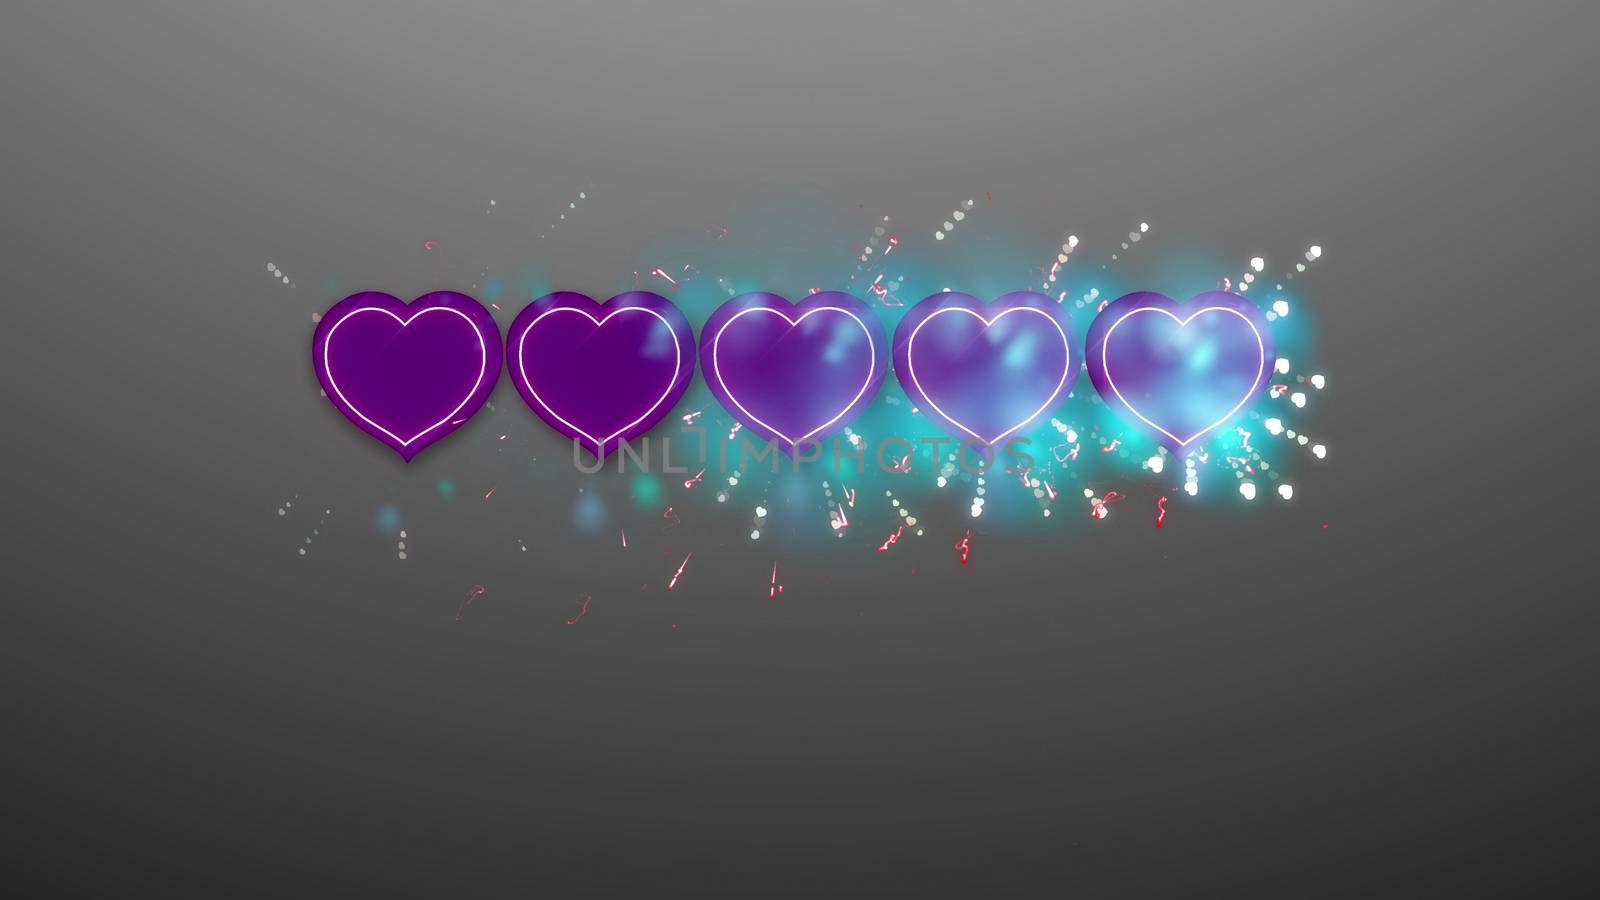 Star rating illustration with violet hearts by klss